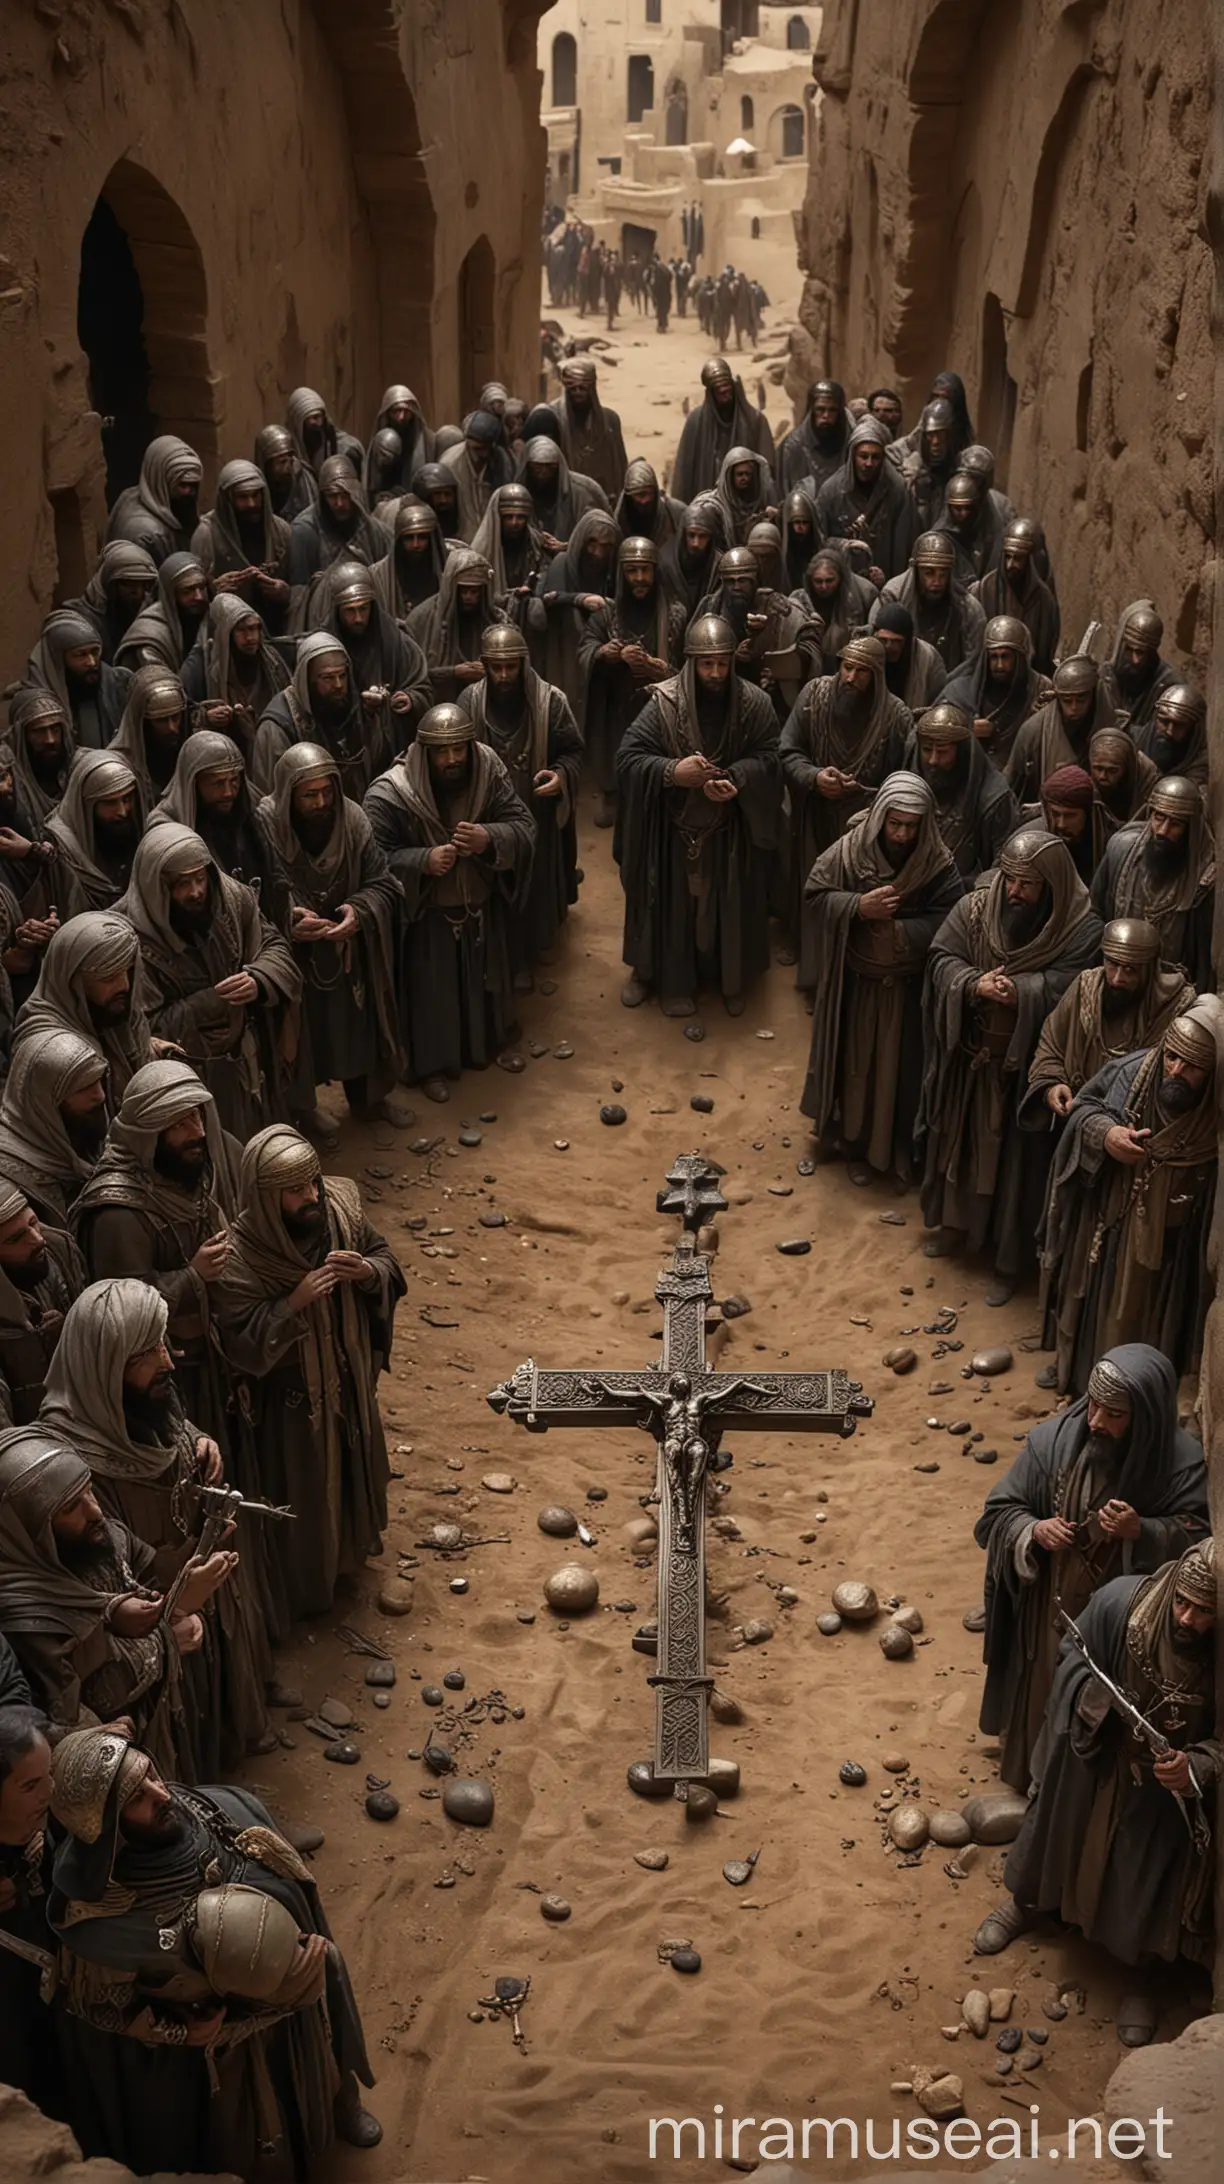  Highlight the relic of the true cross, the contrast between Baldwin’s small force and Saladin’s larger army, and the dramatic tension in the scene. hyper realistic